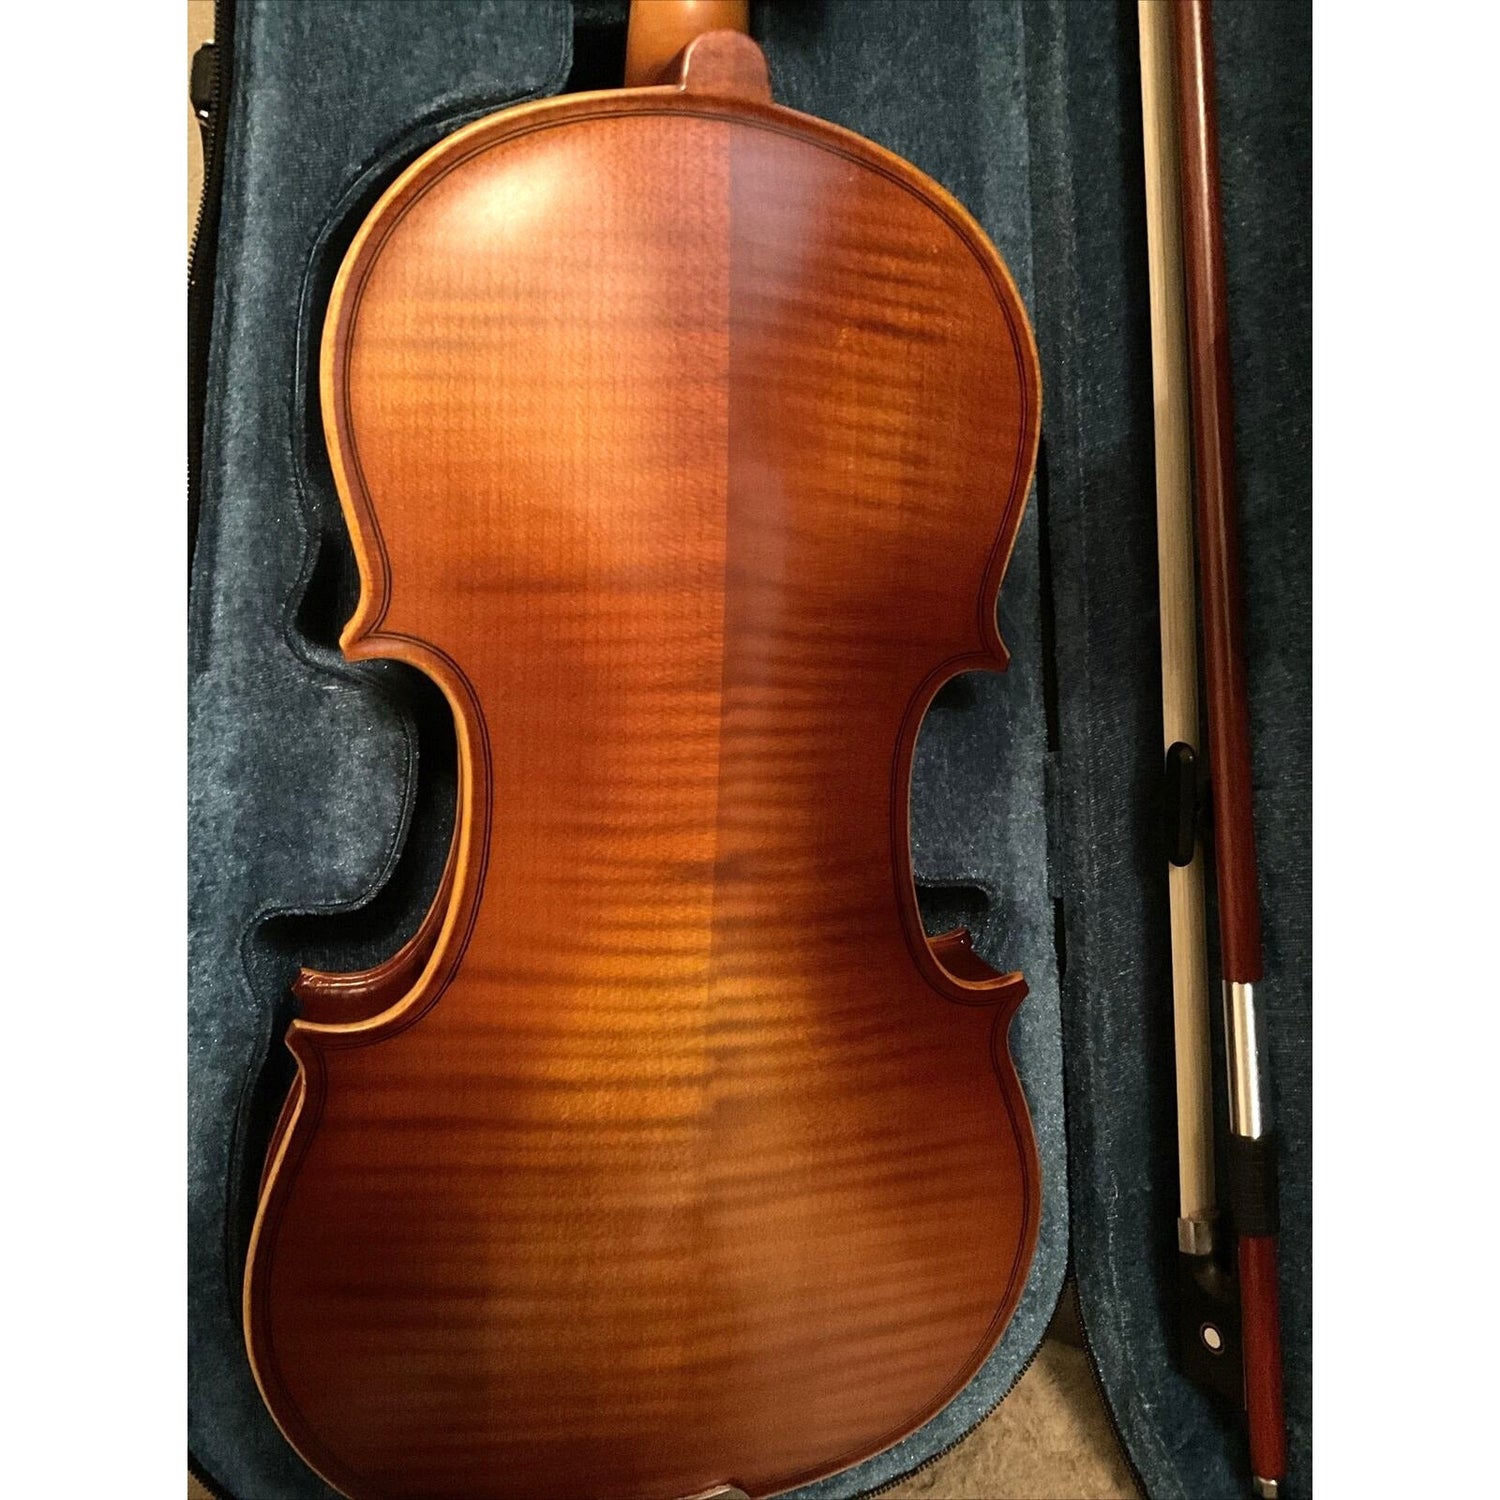 Handmade Flamed Violin 4/4 Professional Solid Maple Wood Shoulder Holder, Bow - Classic Fashion DealsHandmade Flamed Violin 4/4 Professional Solid Maple Wood Shoulder Holder, BowviolinUnbrandedClassic Fashion Deals